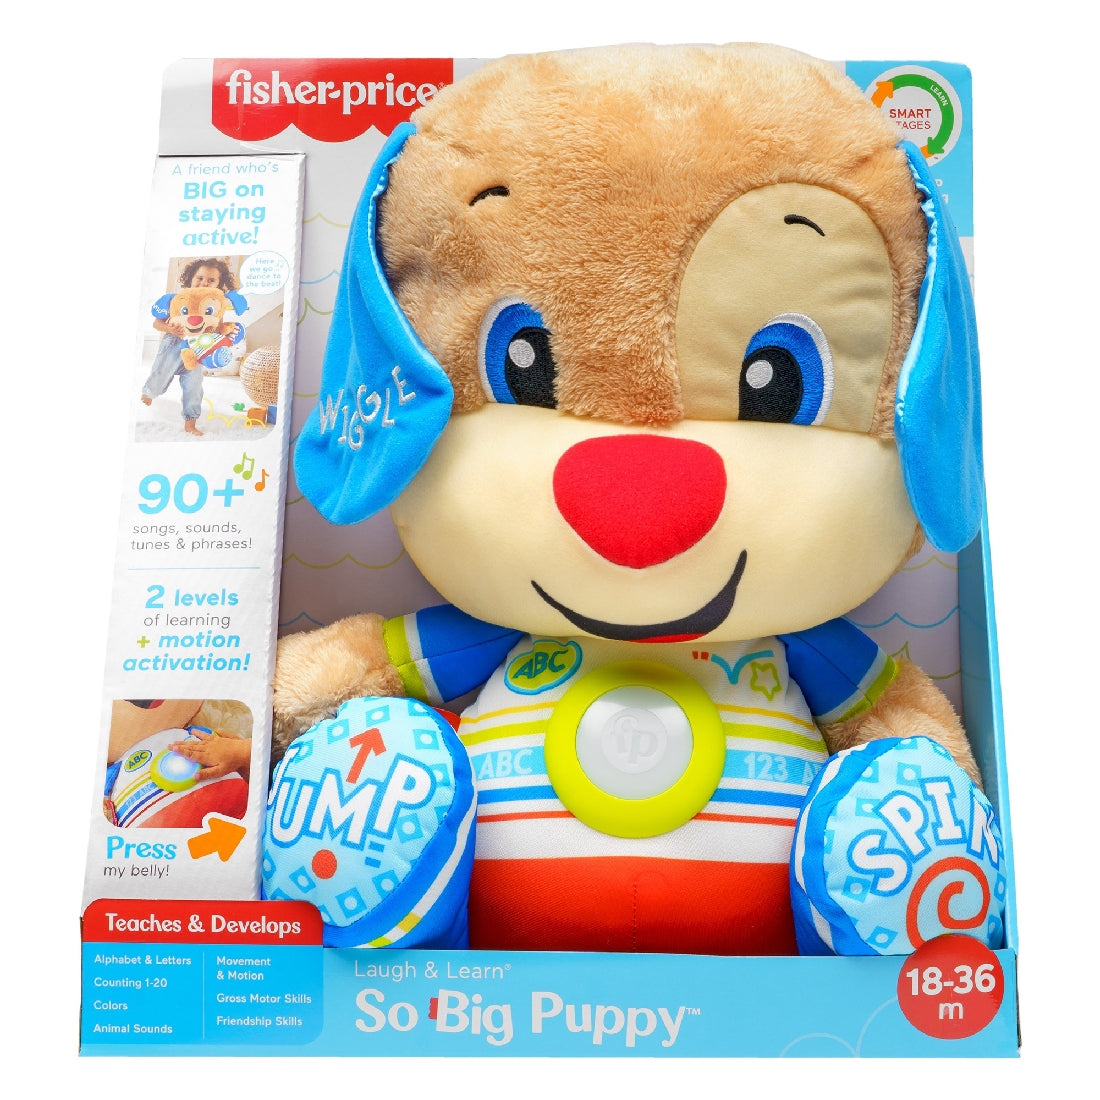 FISHER-PRICE LAUGH & LEARN SO BIG PUPPY